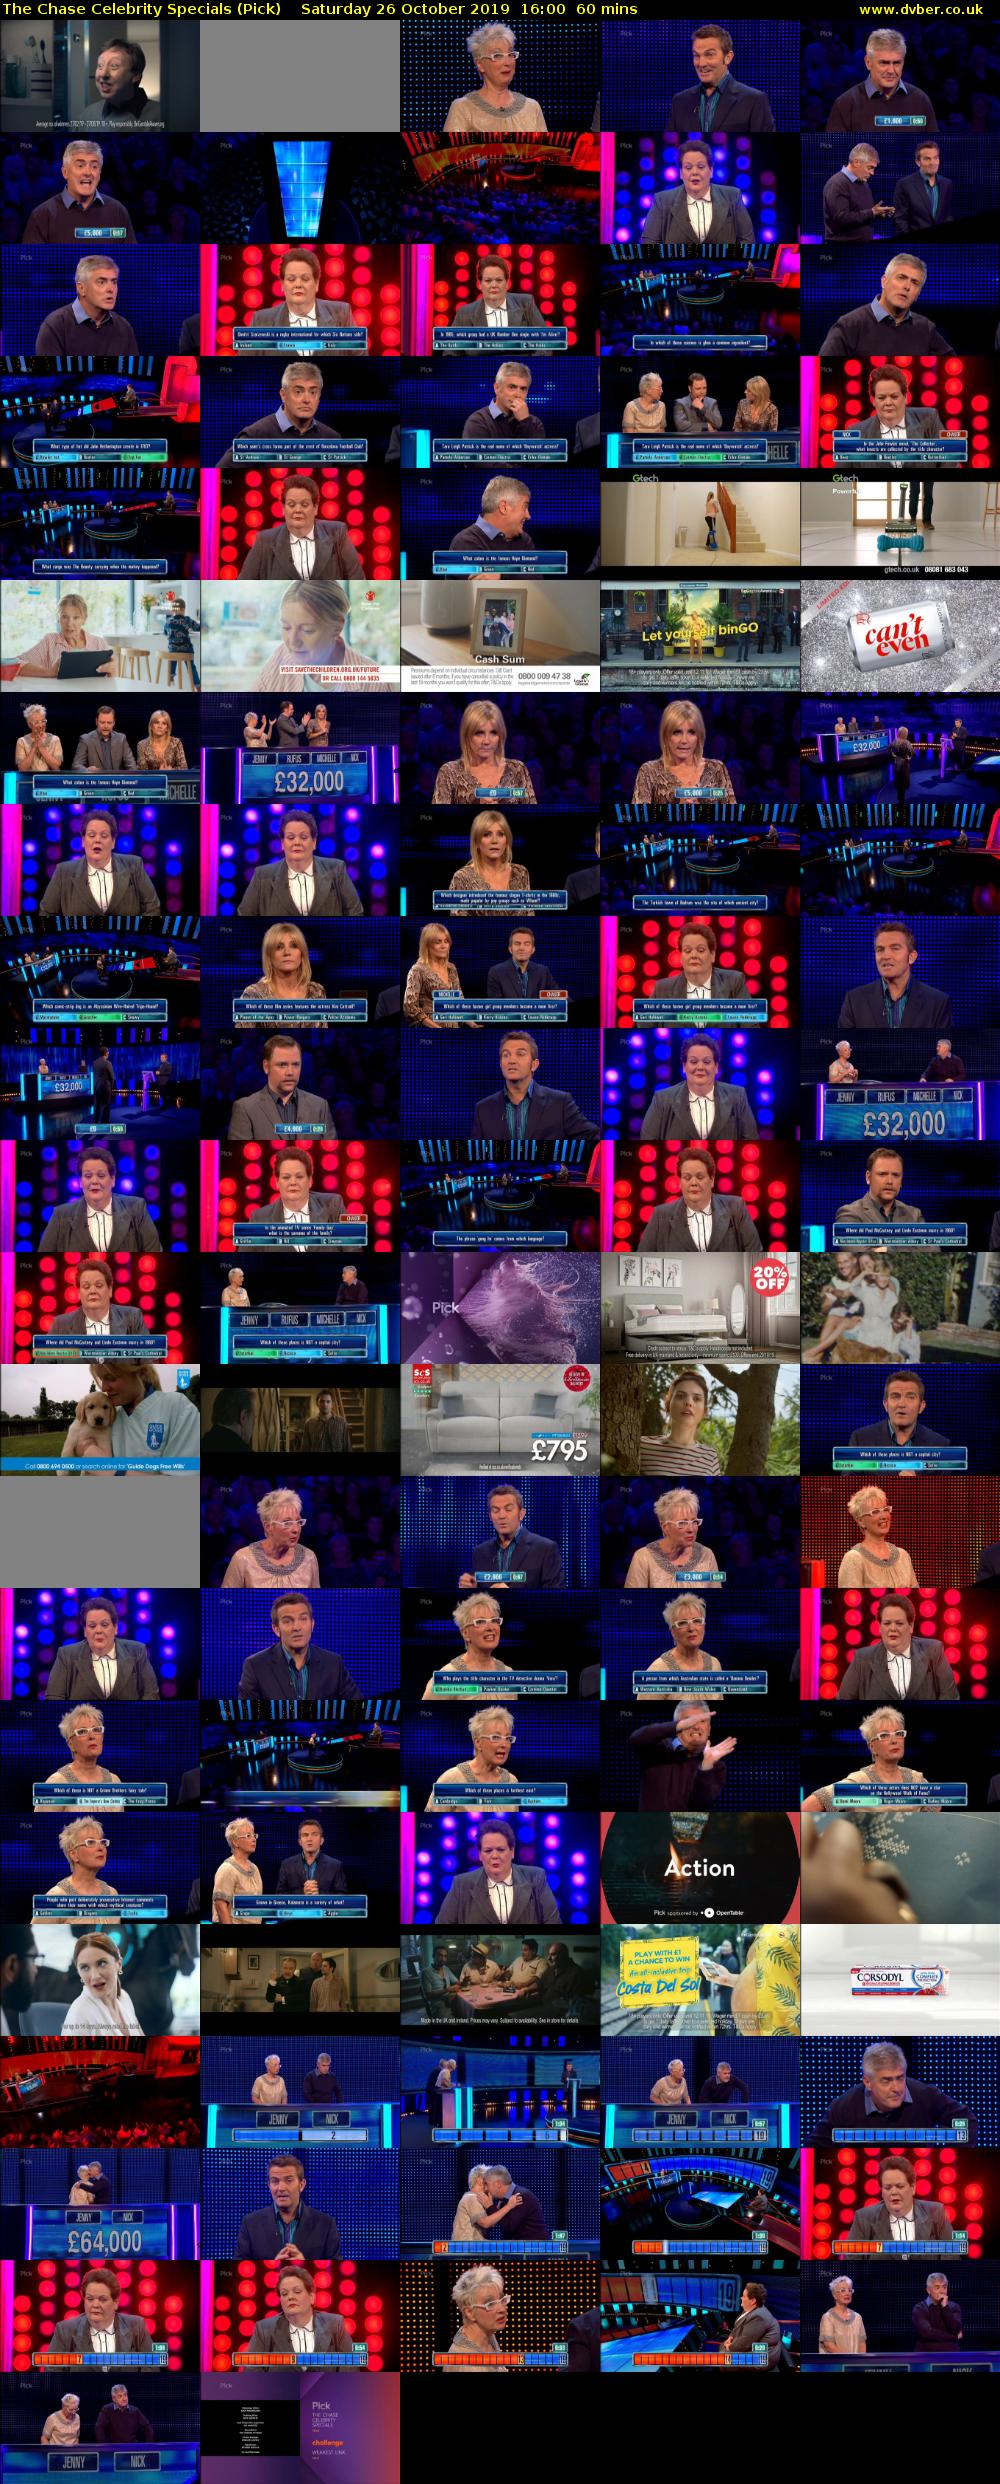 The Chase Celebrity Specials (Pick) Saturday 26 October 2019 16:00 - 17:00